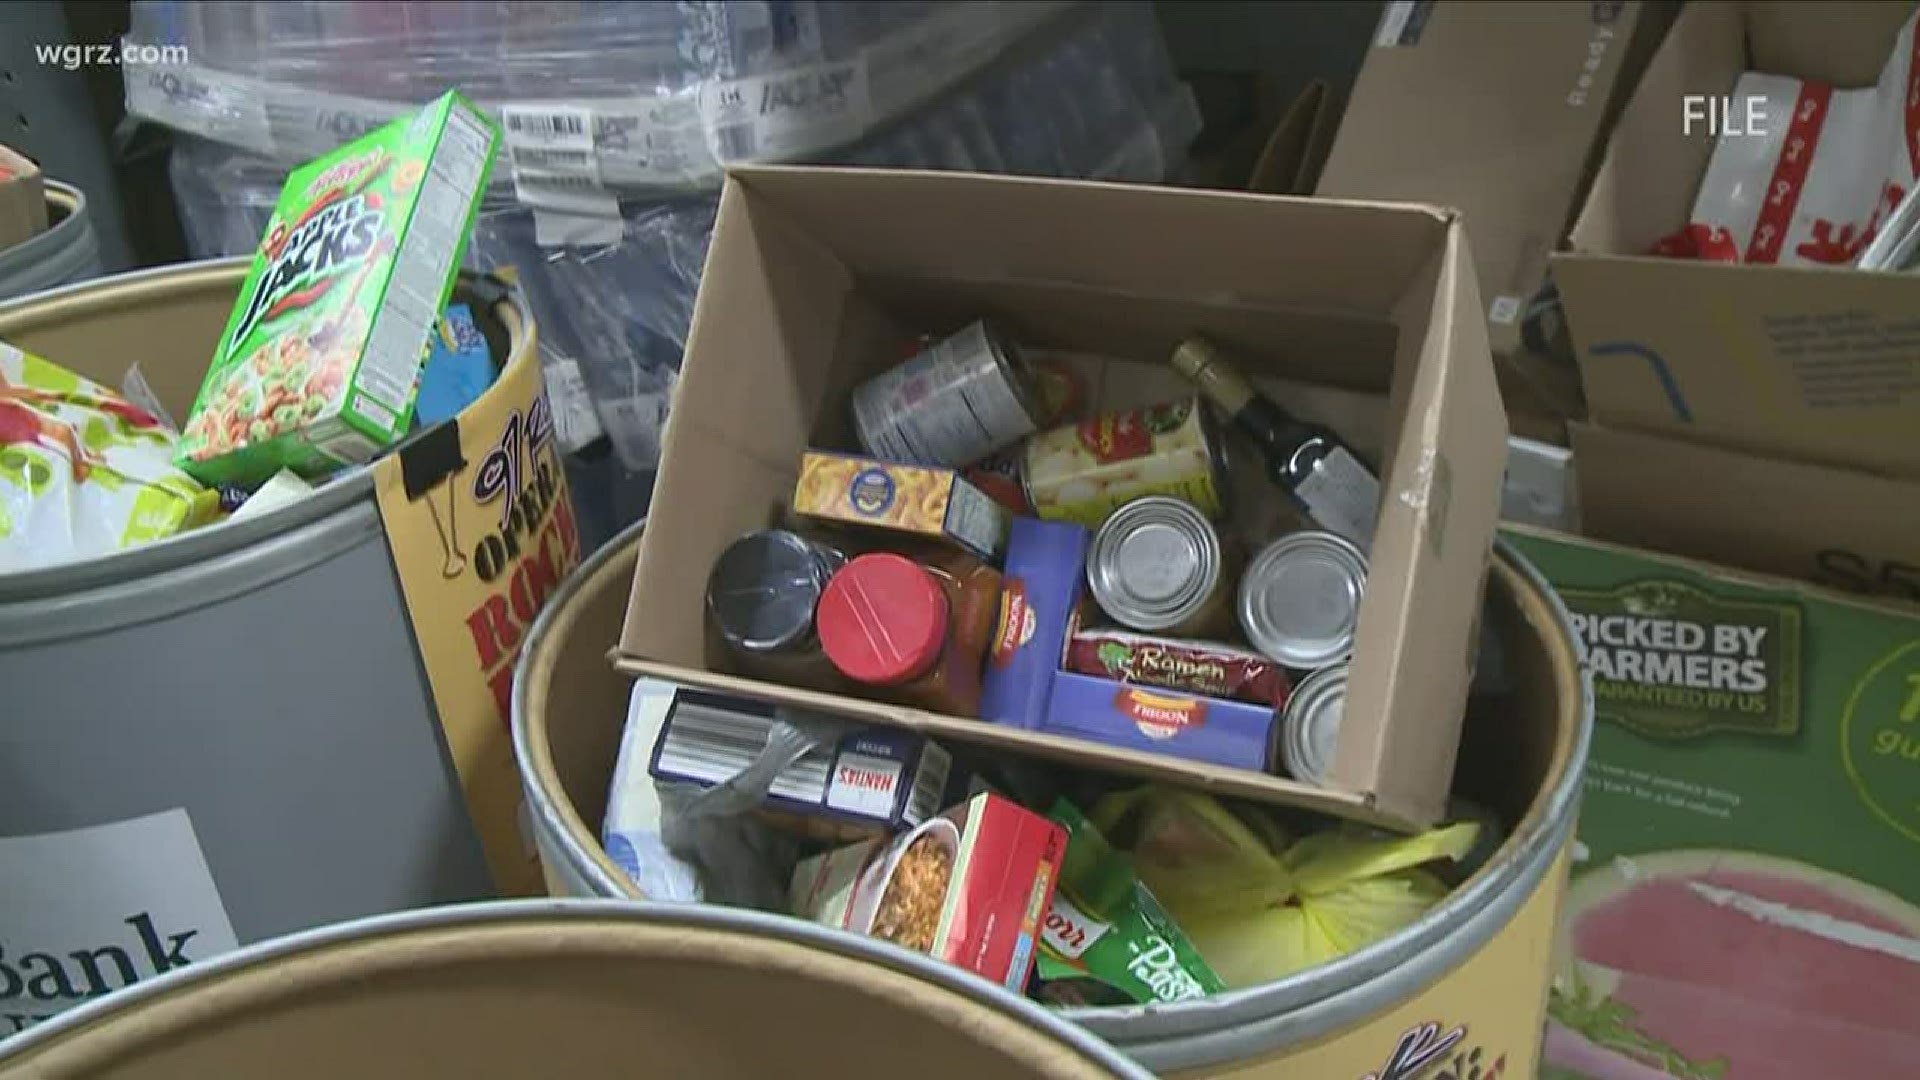 Governor Cuomo announced the state would be providing $25 million to food banks as part of the Nourish New York Initiative, but how exactly will that impact WNY.